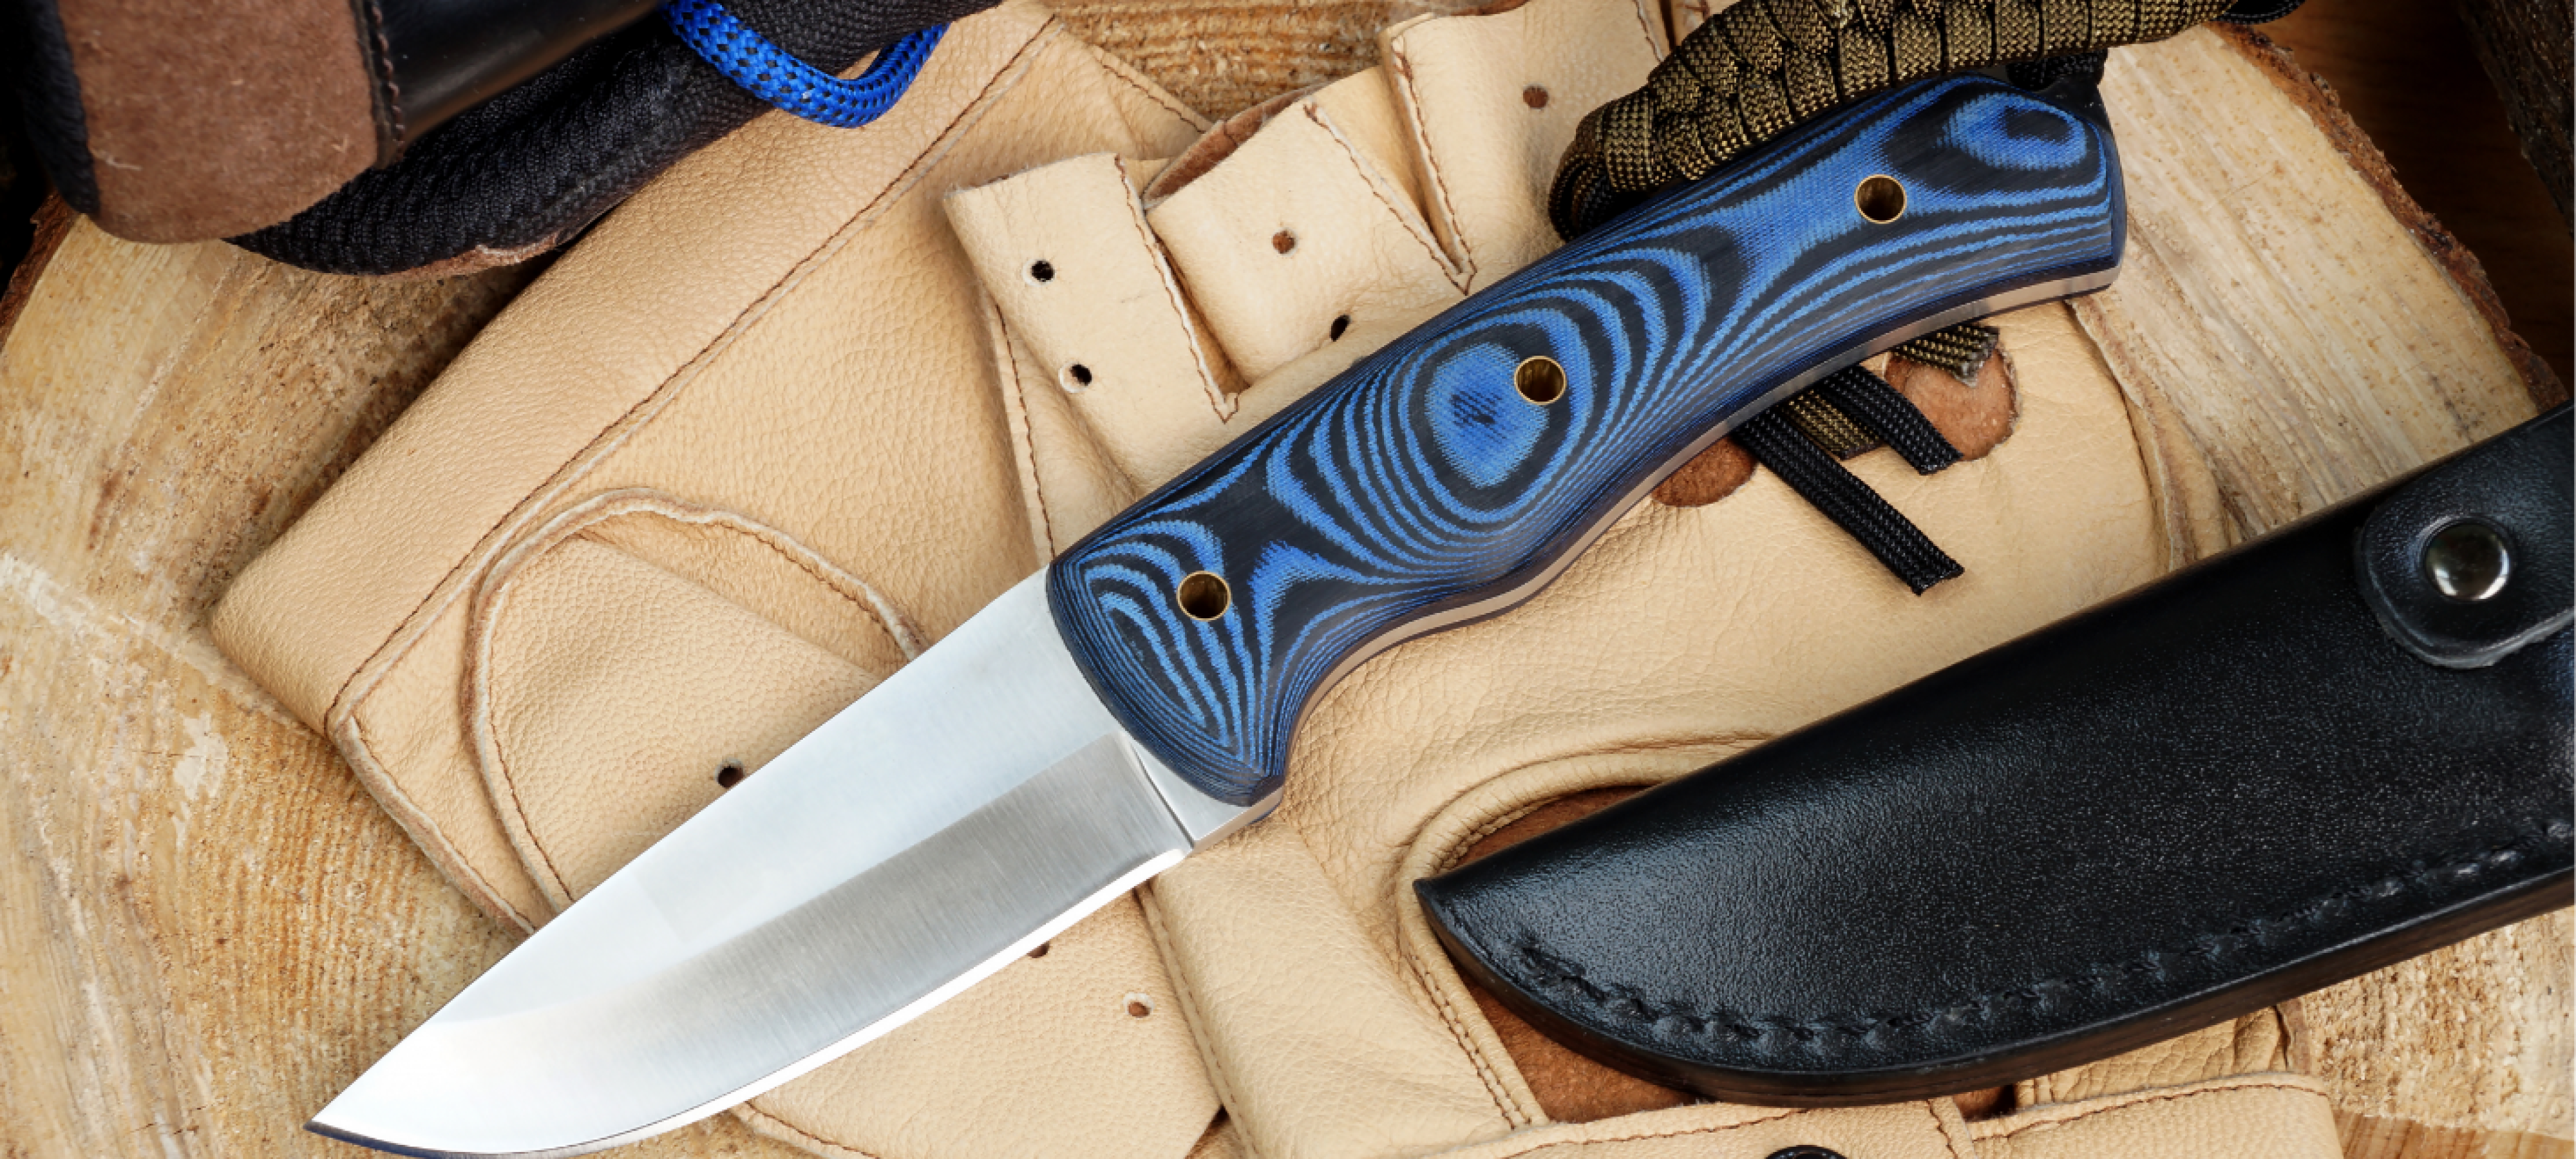 Best Five Serrated Pocket Knives to Buy in 2023